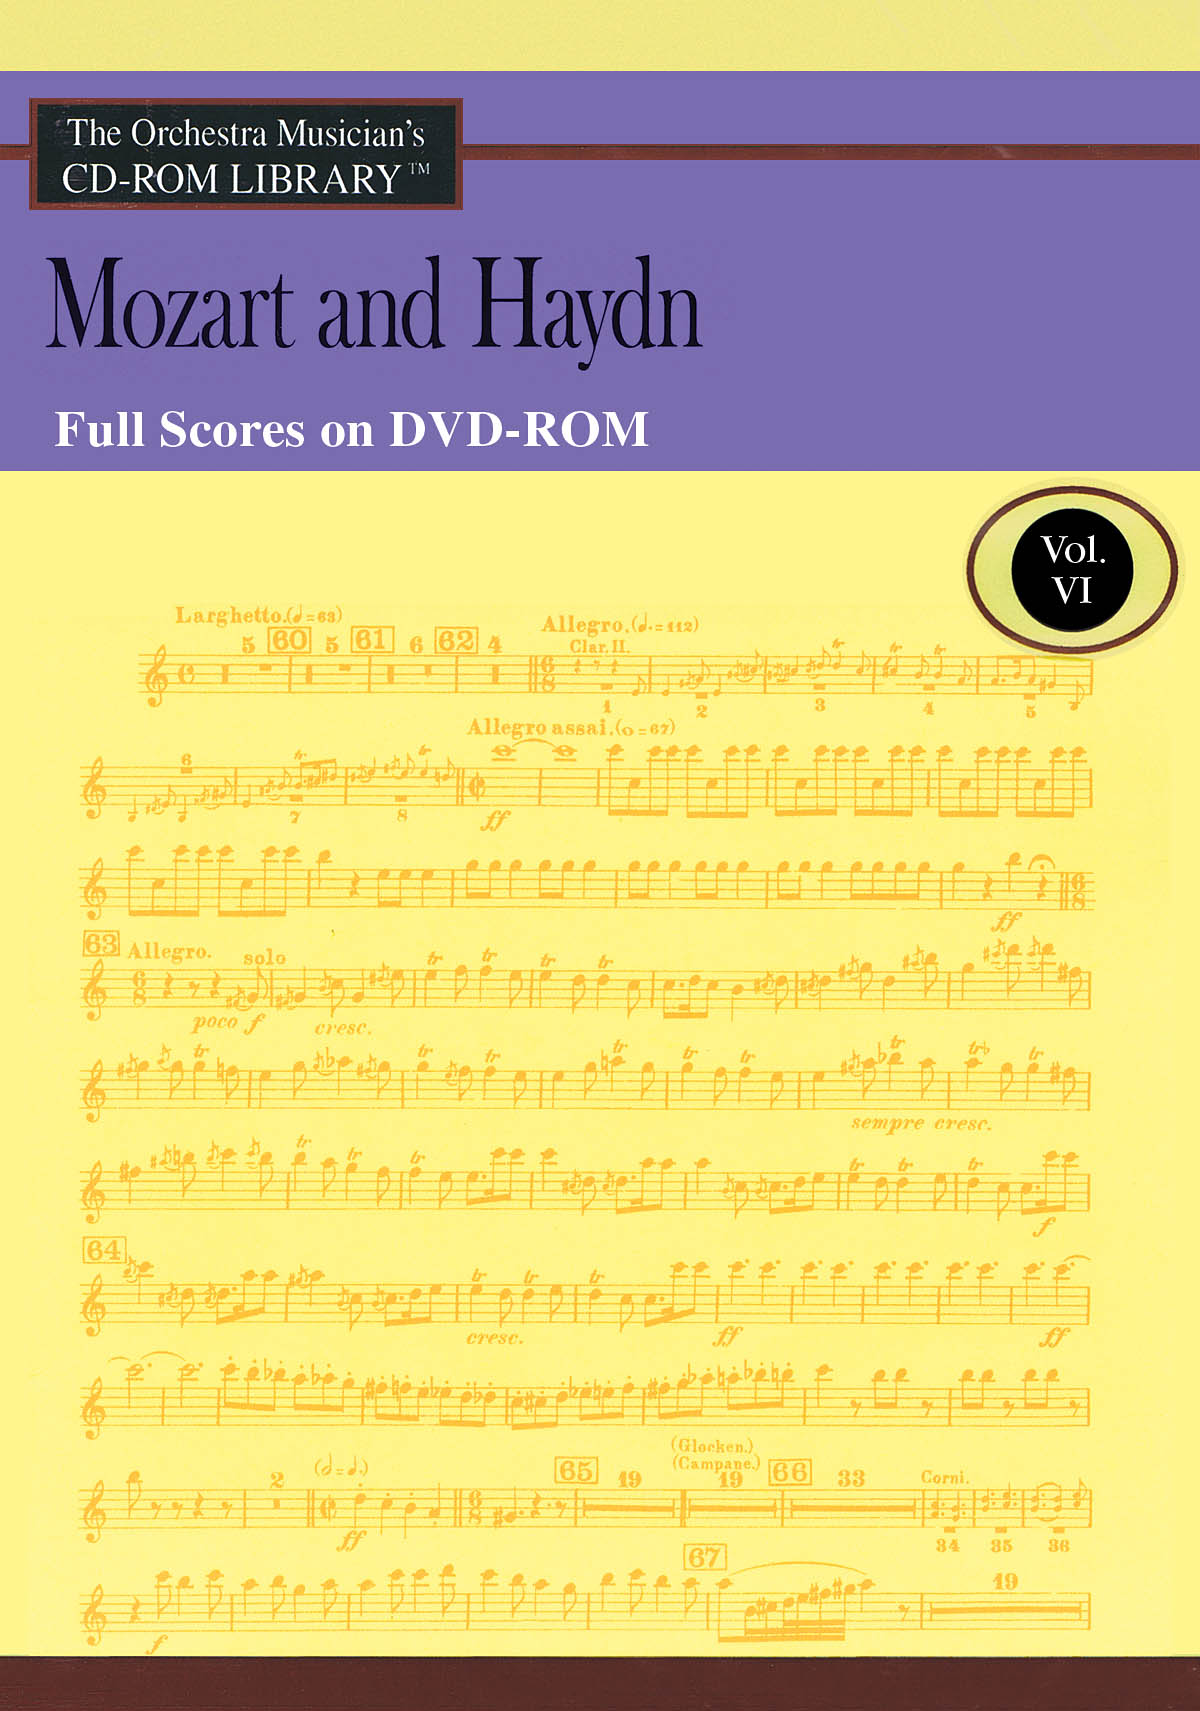 Mozart and Haydn – Vol. 6(The Orchestra Musician’s CD-ROM Library)